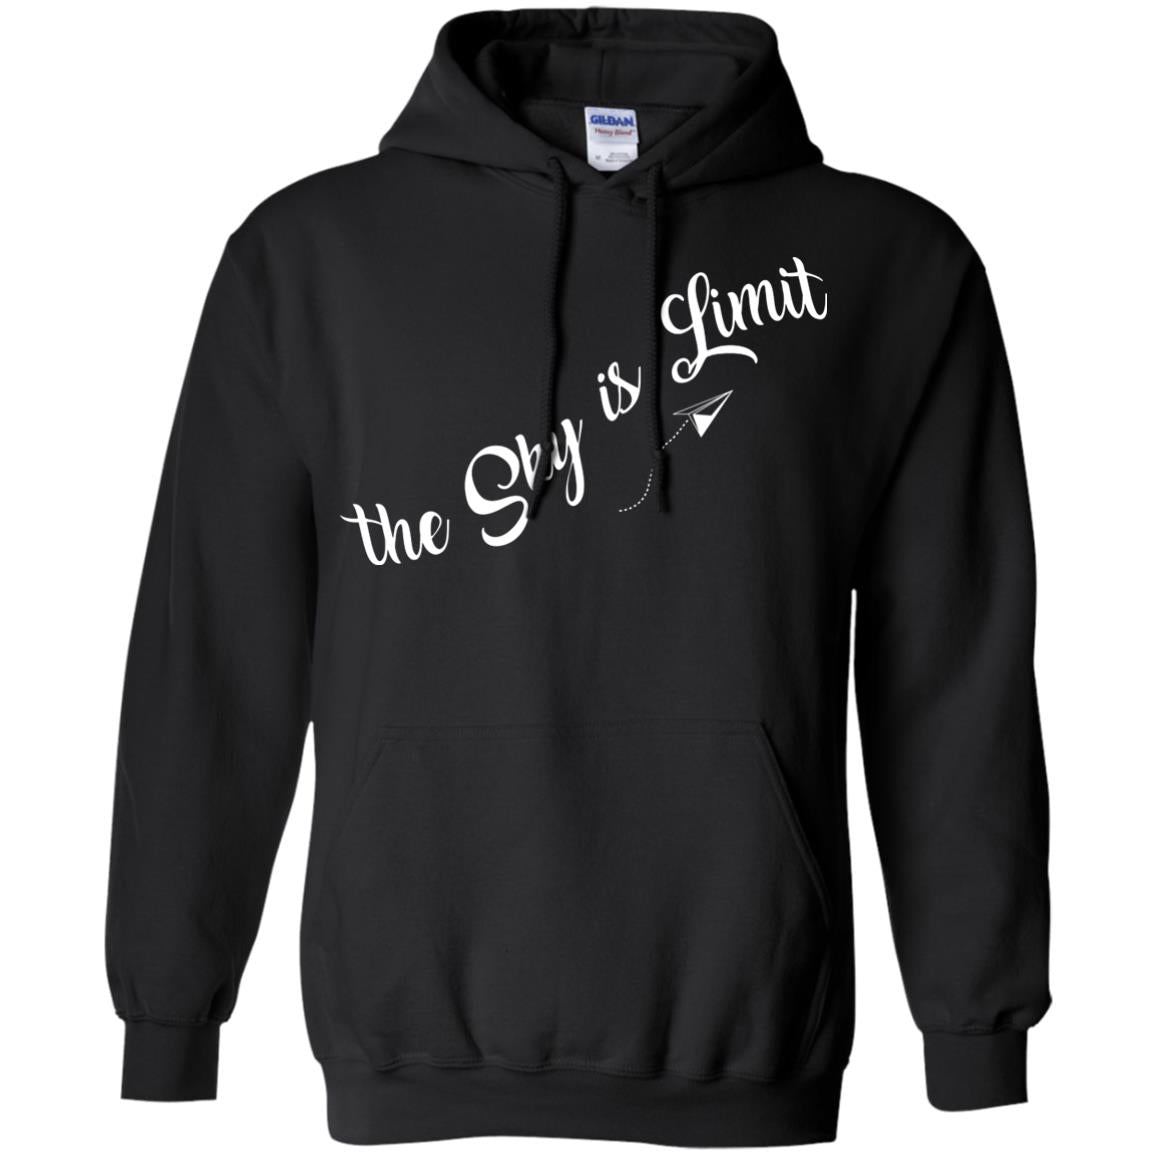 The Sky Is Limit T-shirt